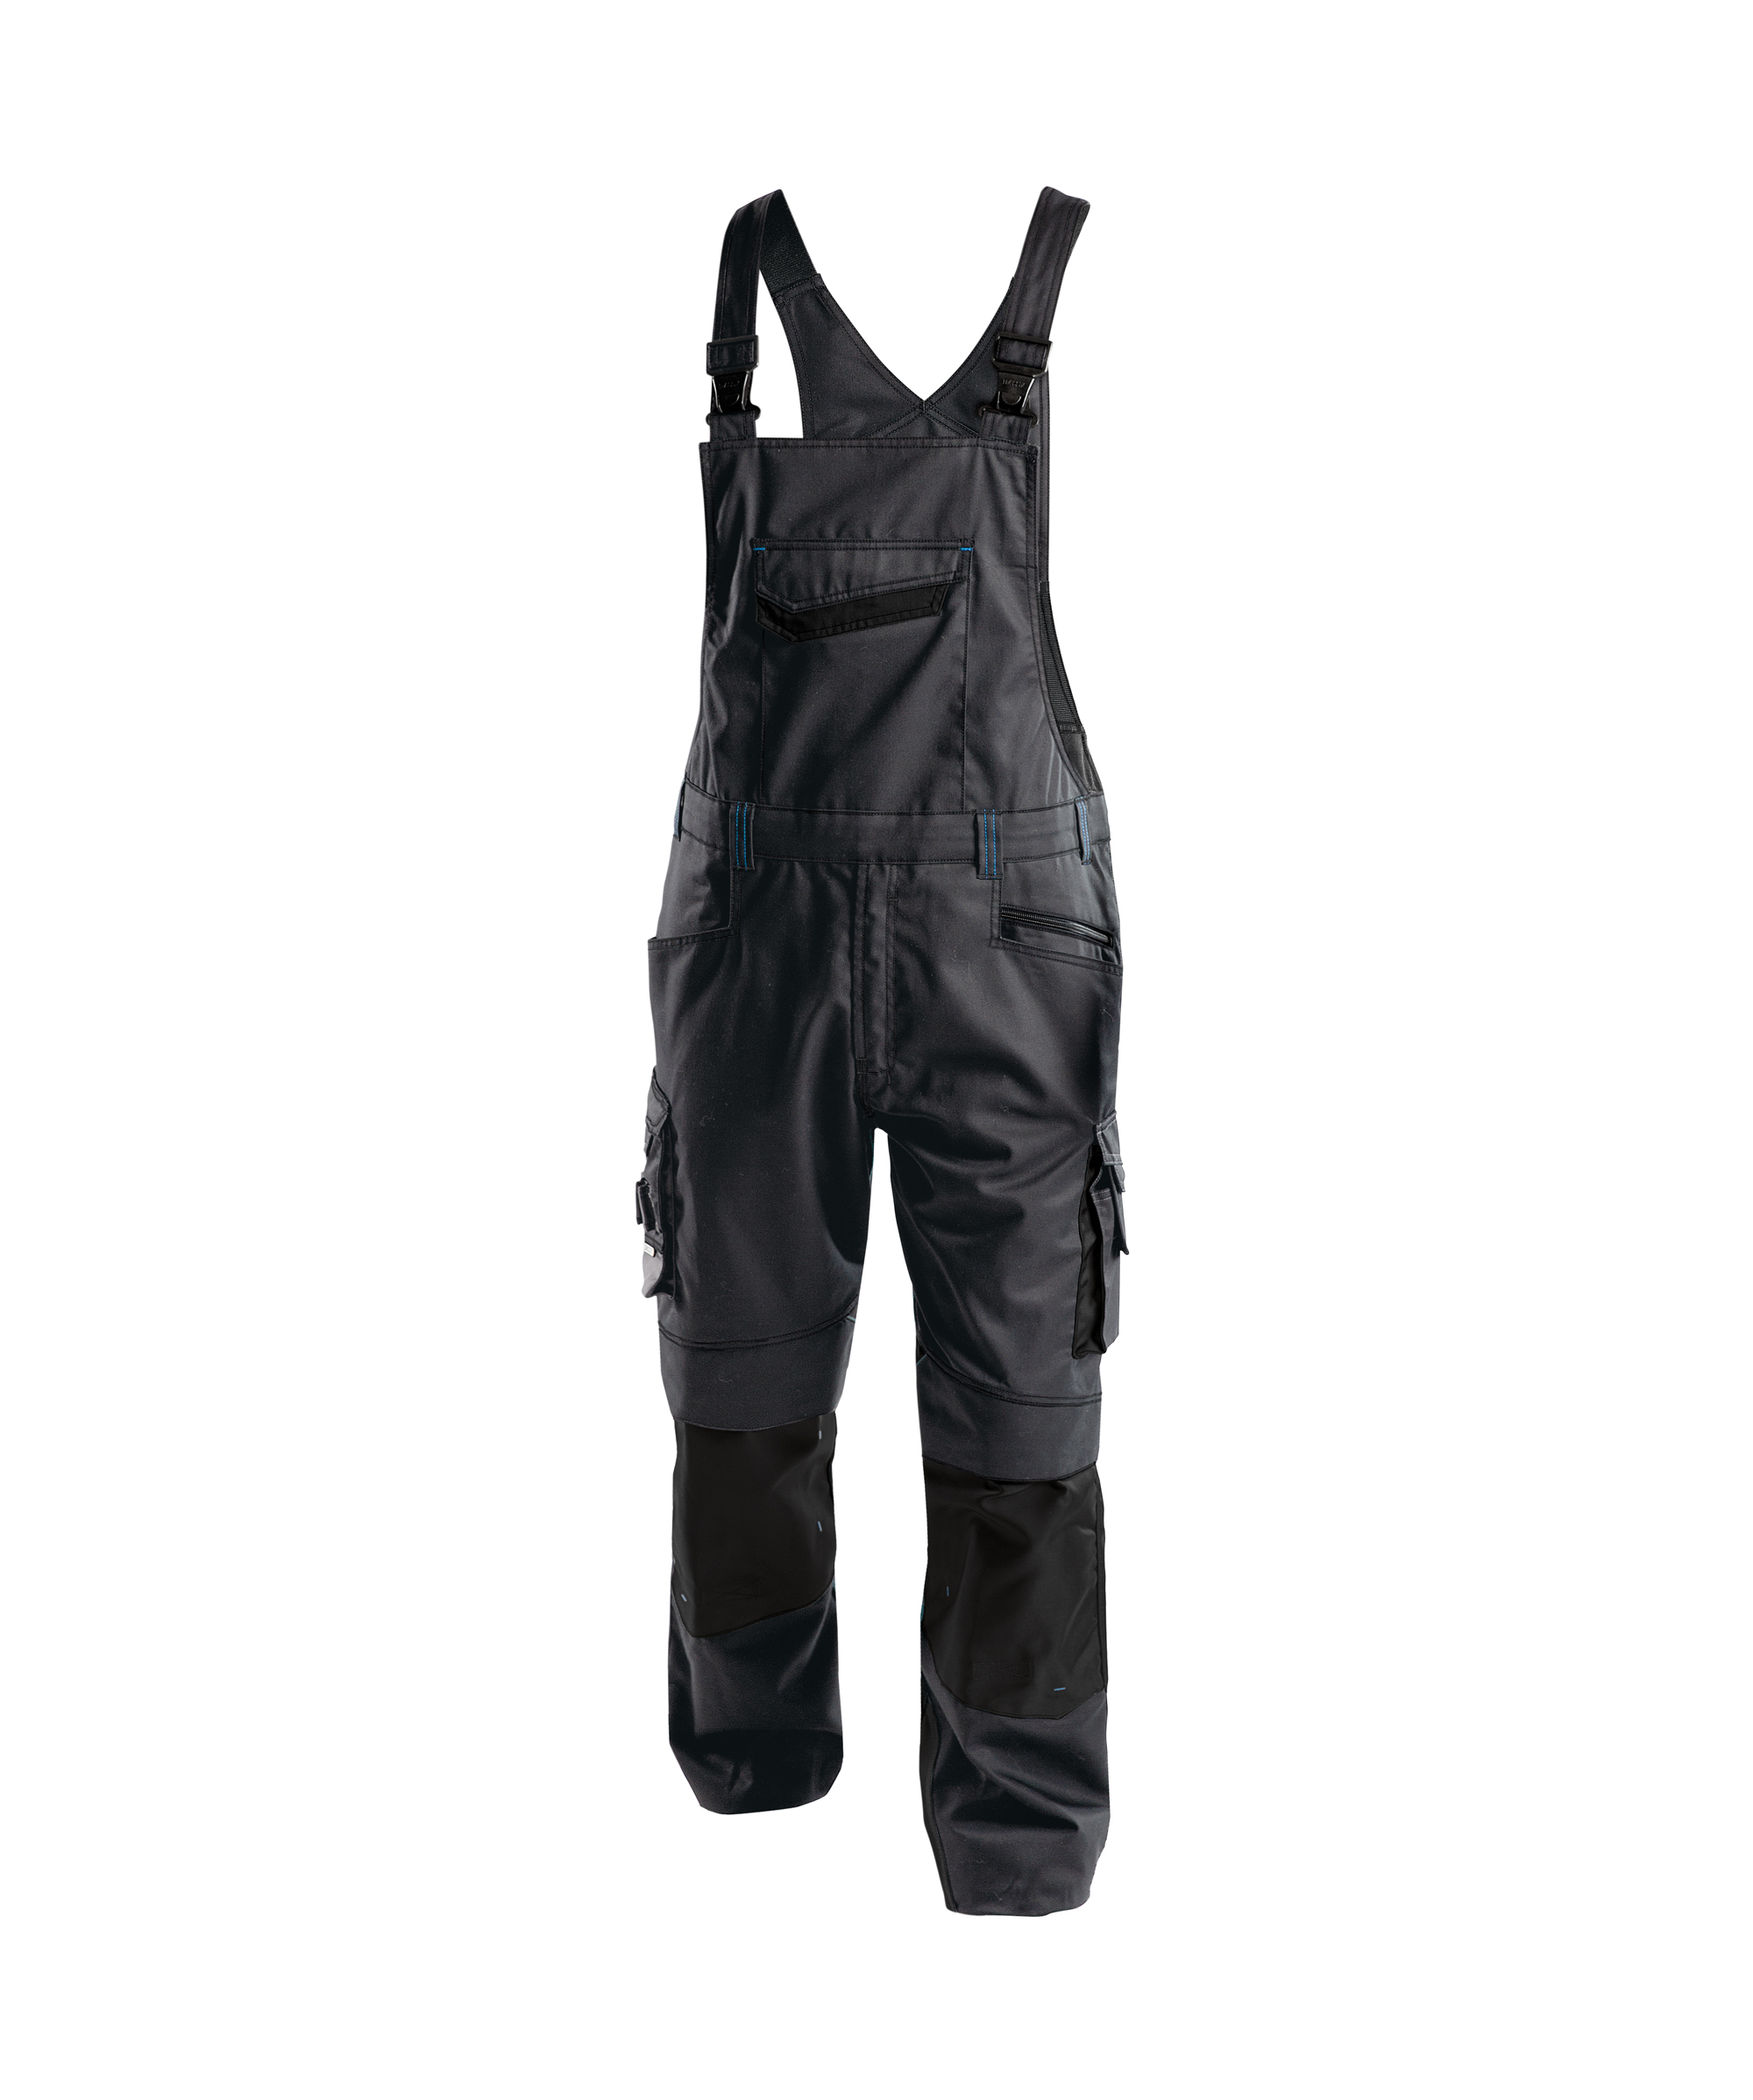 voltic_two-tone-brace-overall-with-knee-pockets_anthracite-grey-black_front.jpg